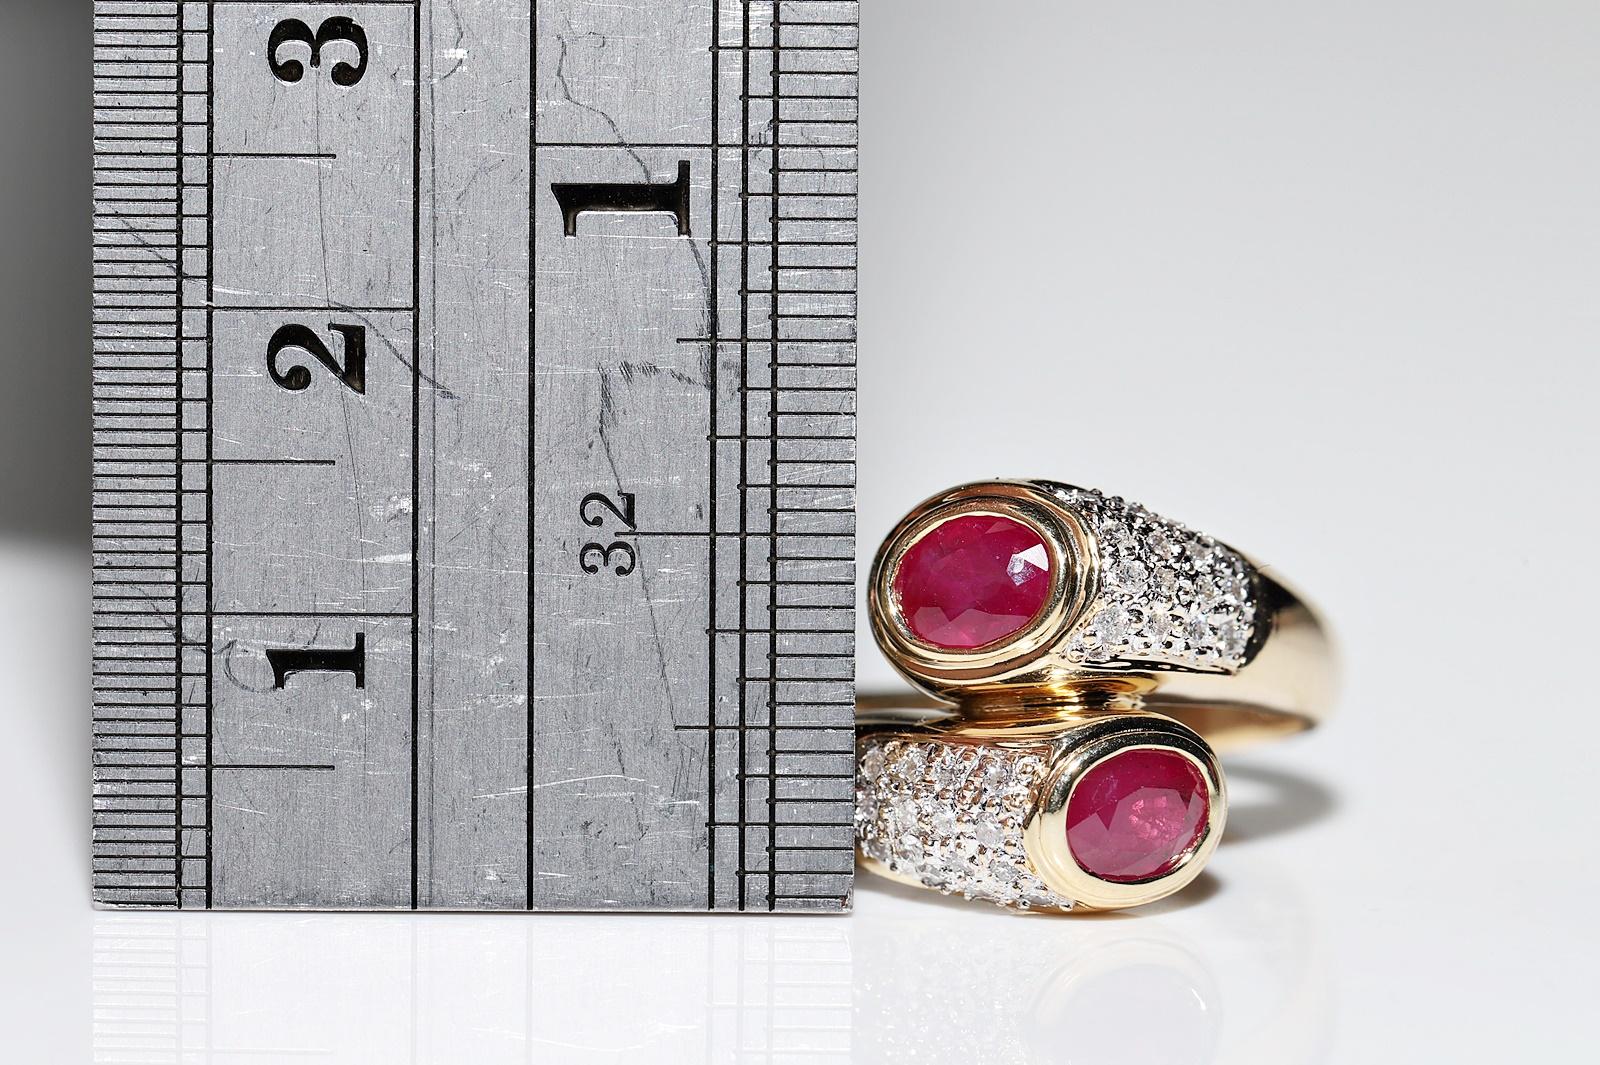 Vintage Circa 1980s 18k Gold Natural Diamond And Ruby Decorated Ring In Good Condition For Sale In Fatih/İstanbul, 34